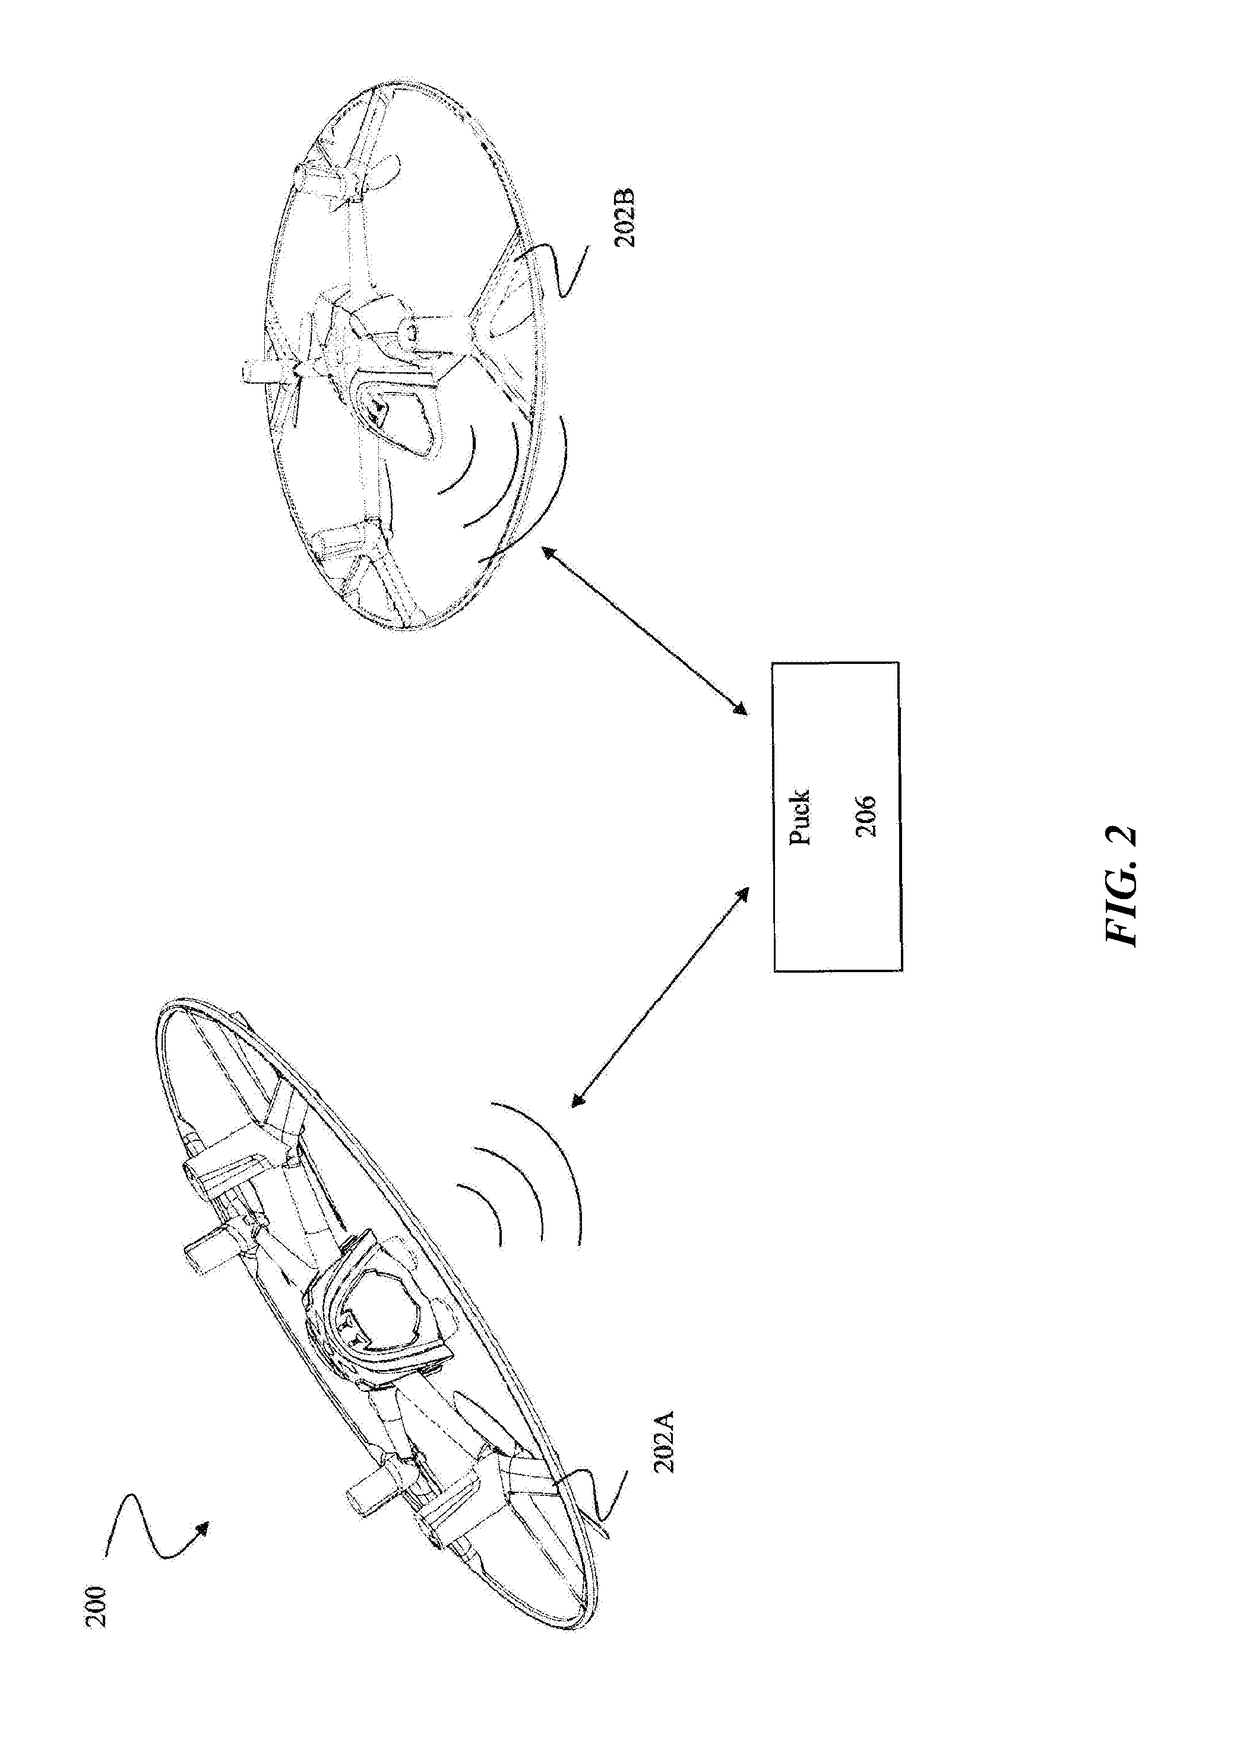 System for game play with multiple remote-control flying craft with wireless communication